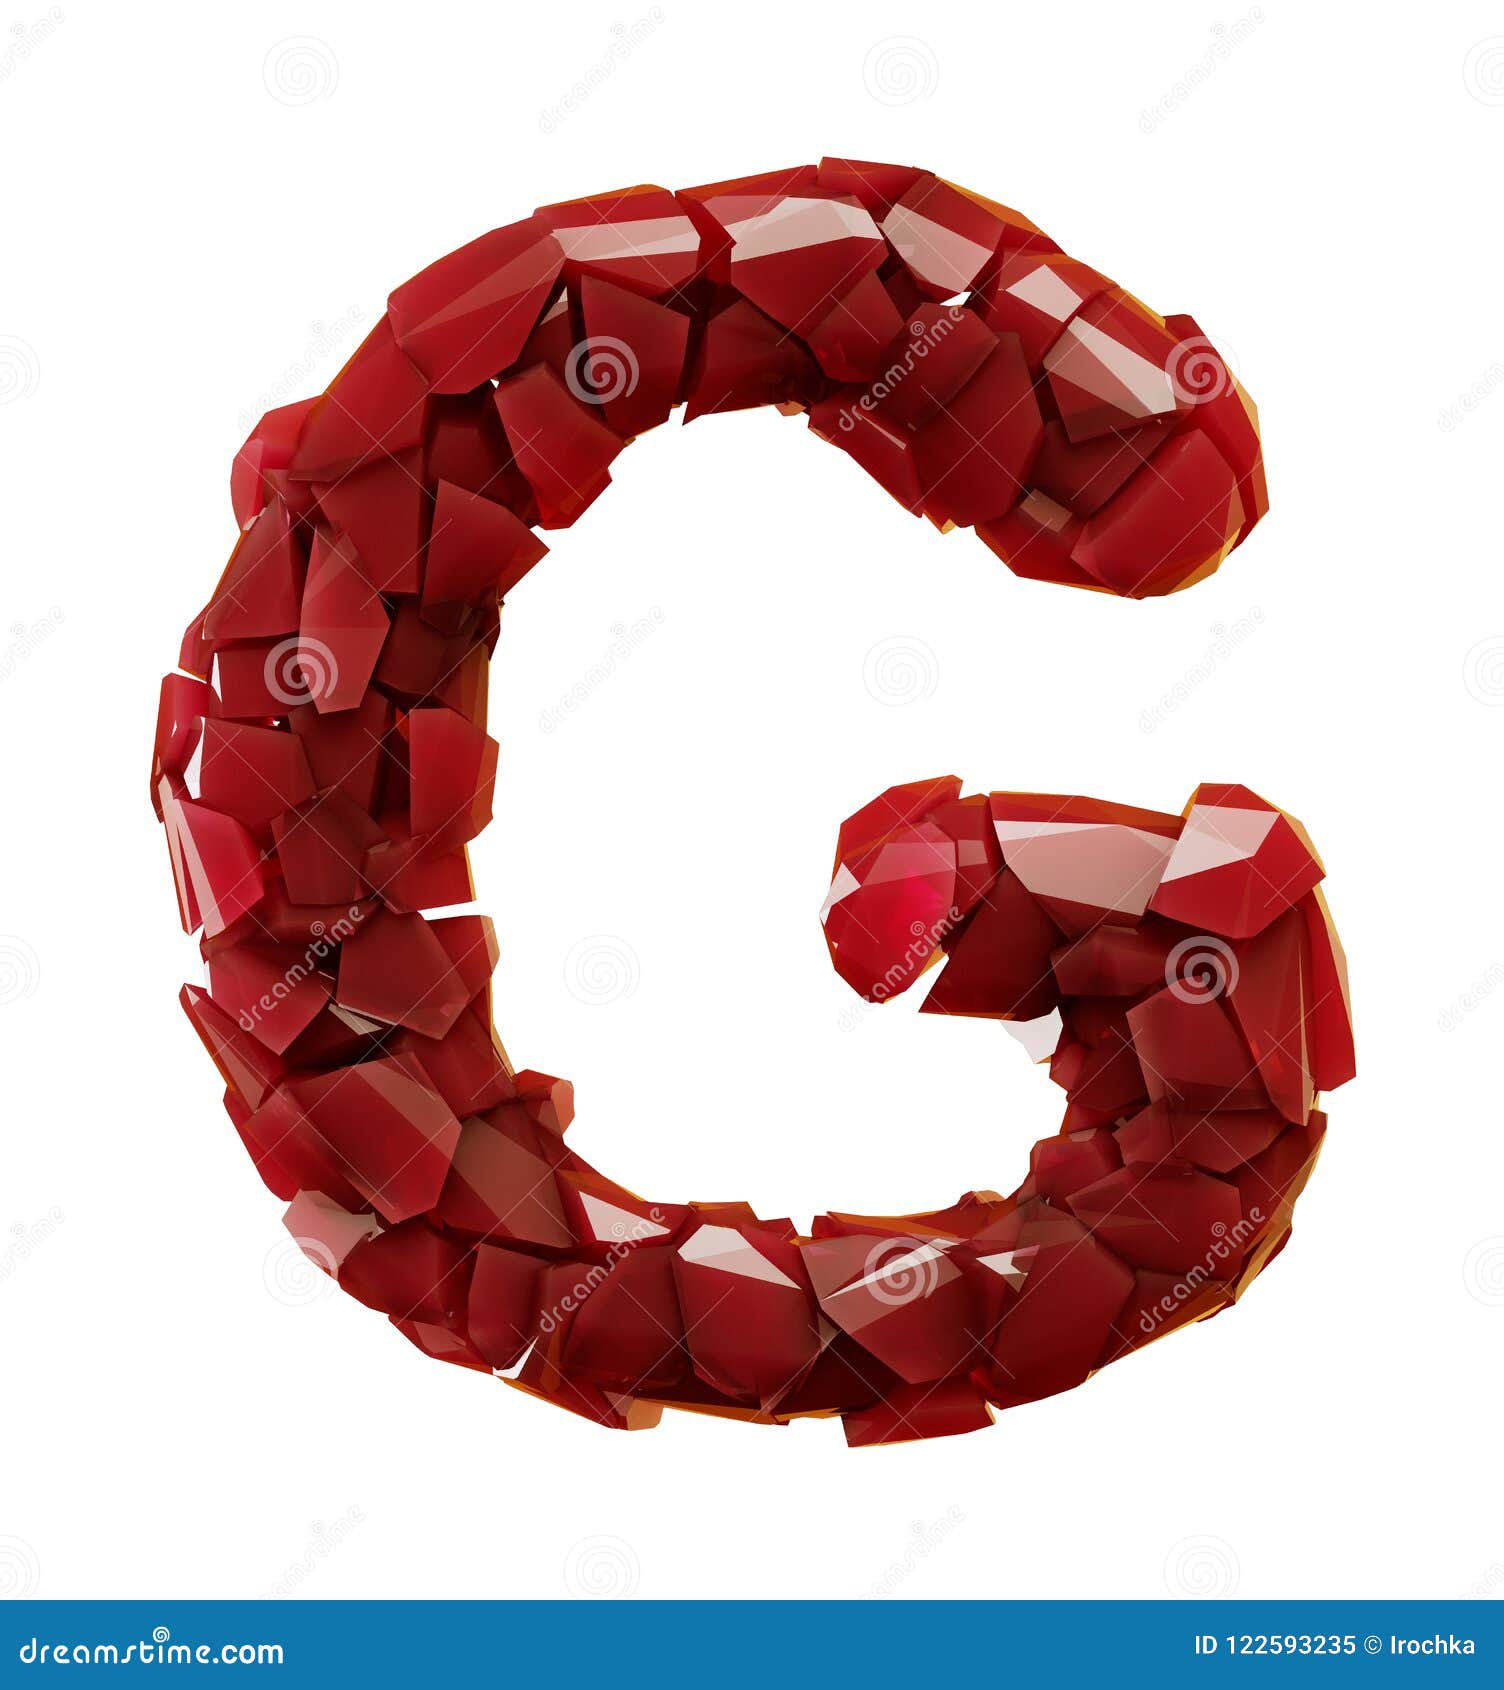 alphabet made of plastic shards red color  on white background- letter g